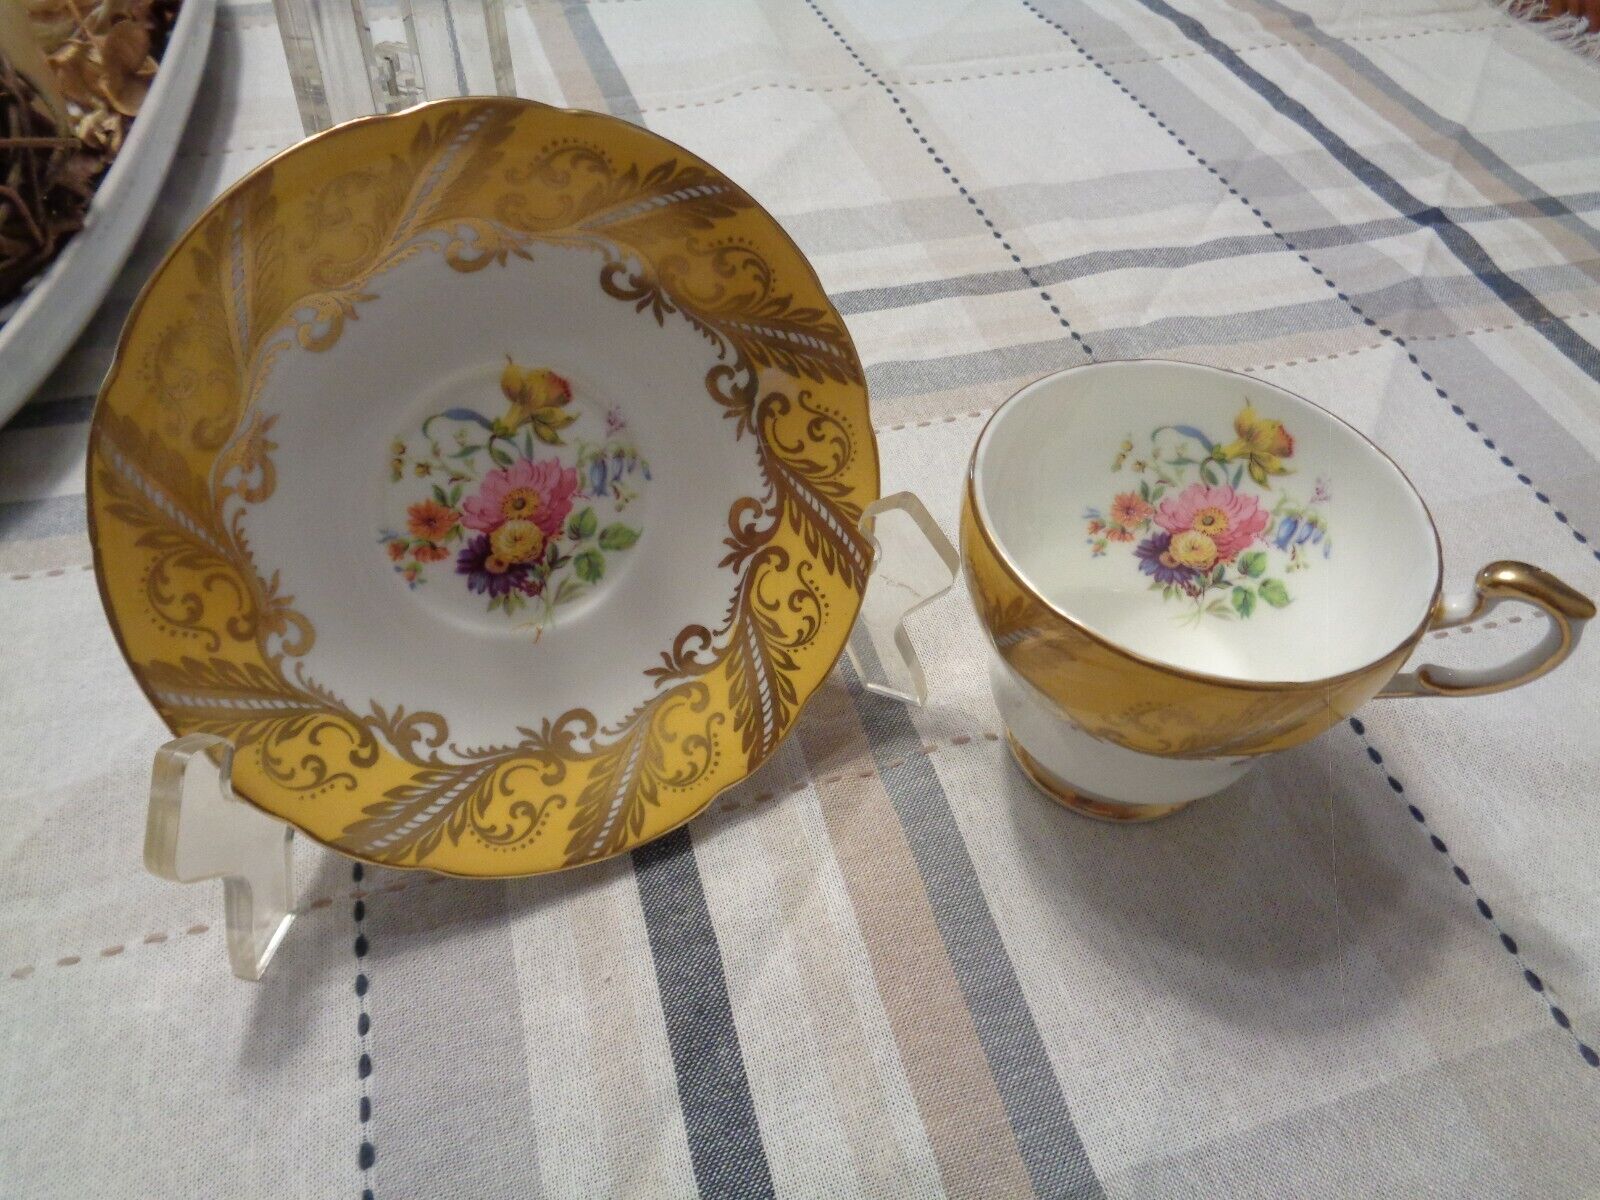 PARAGON TEACUP FINE BONE CHINA BY APPOINTMENT TO HER MAJESTY THE QUEEN ENGLAND